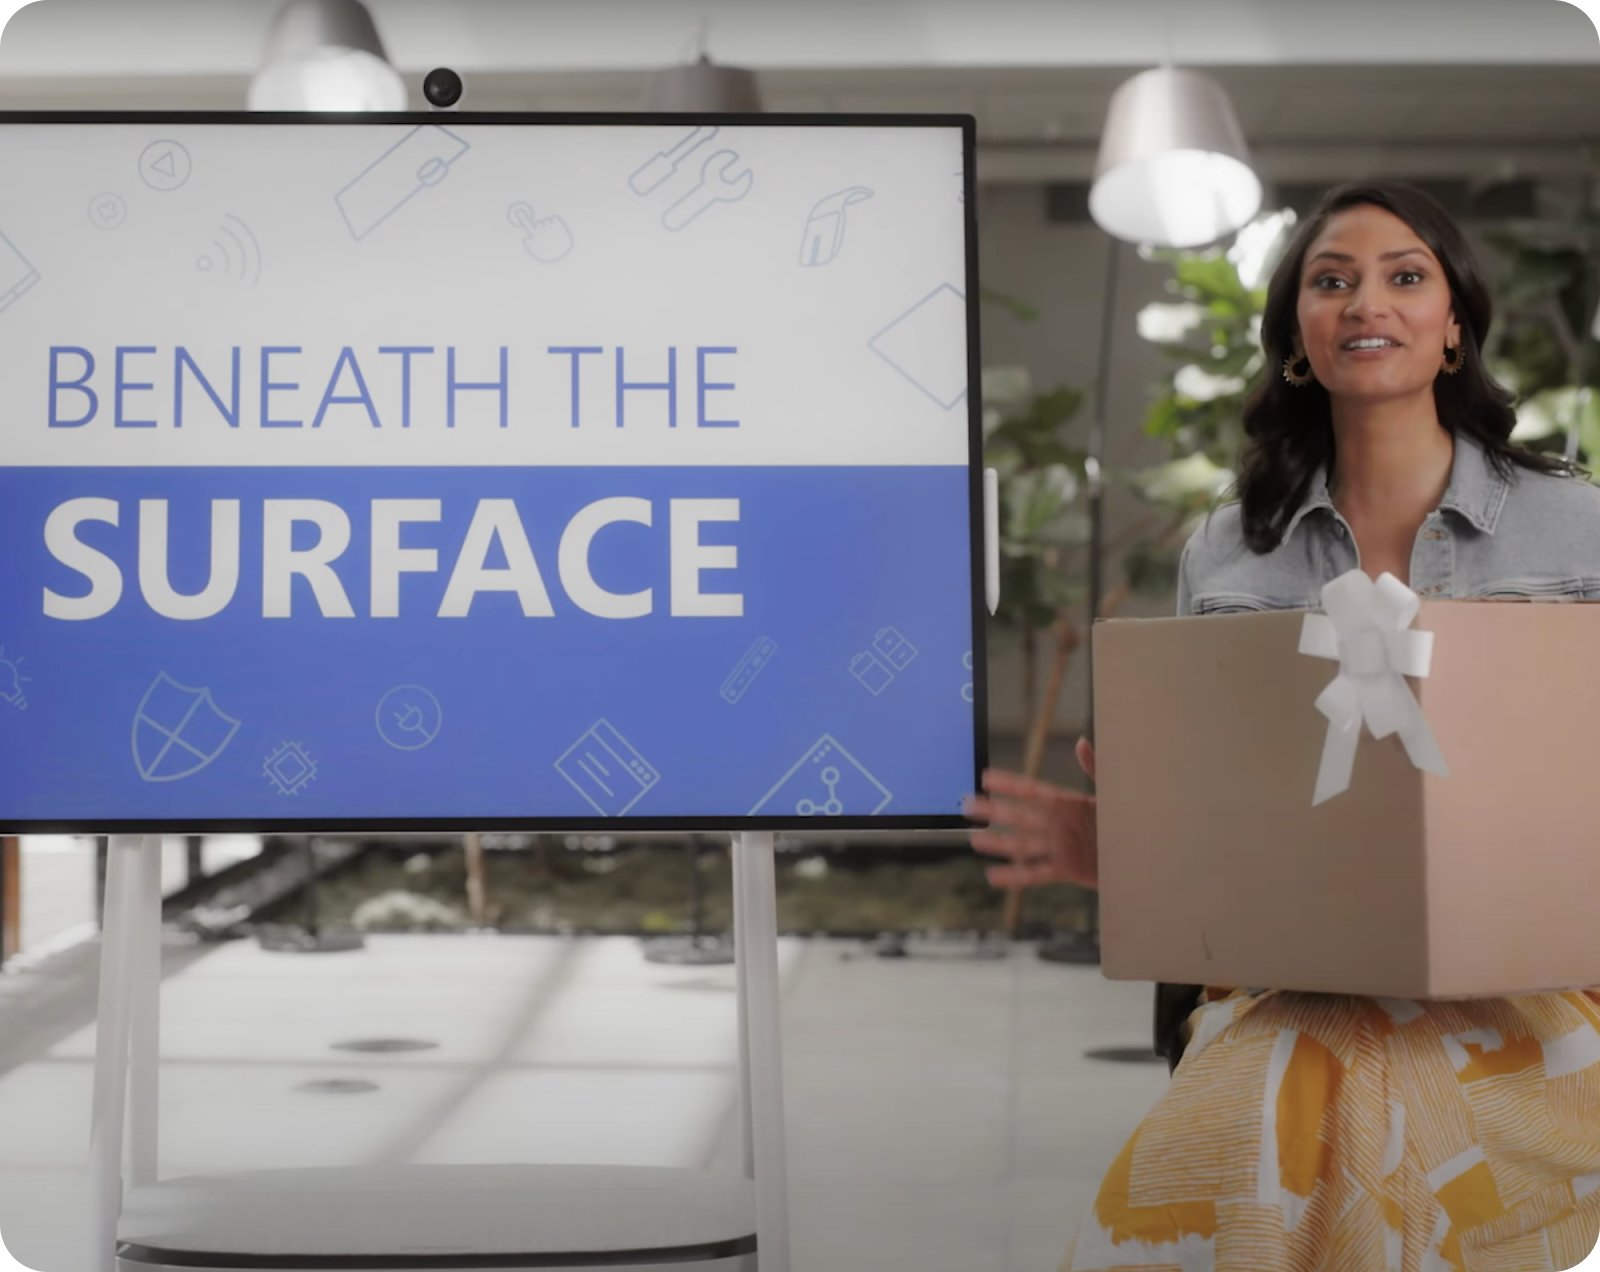 A woman in a dress stands next to a screen displaying "Beneath the Surface" holding a wrapped box.